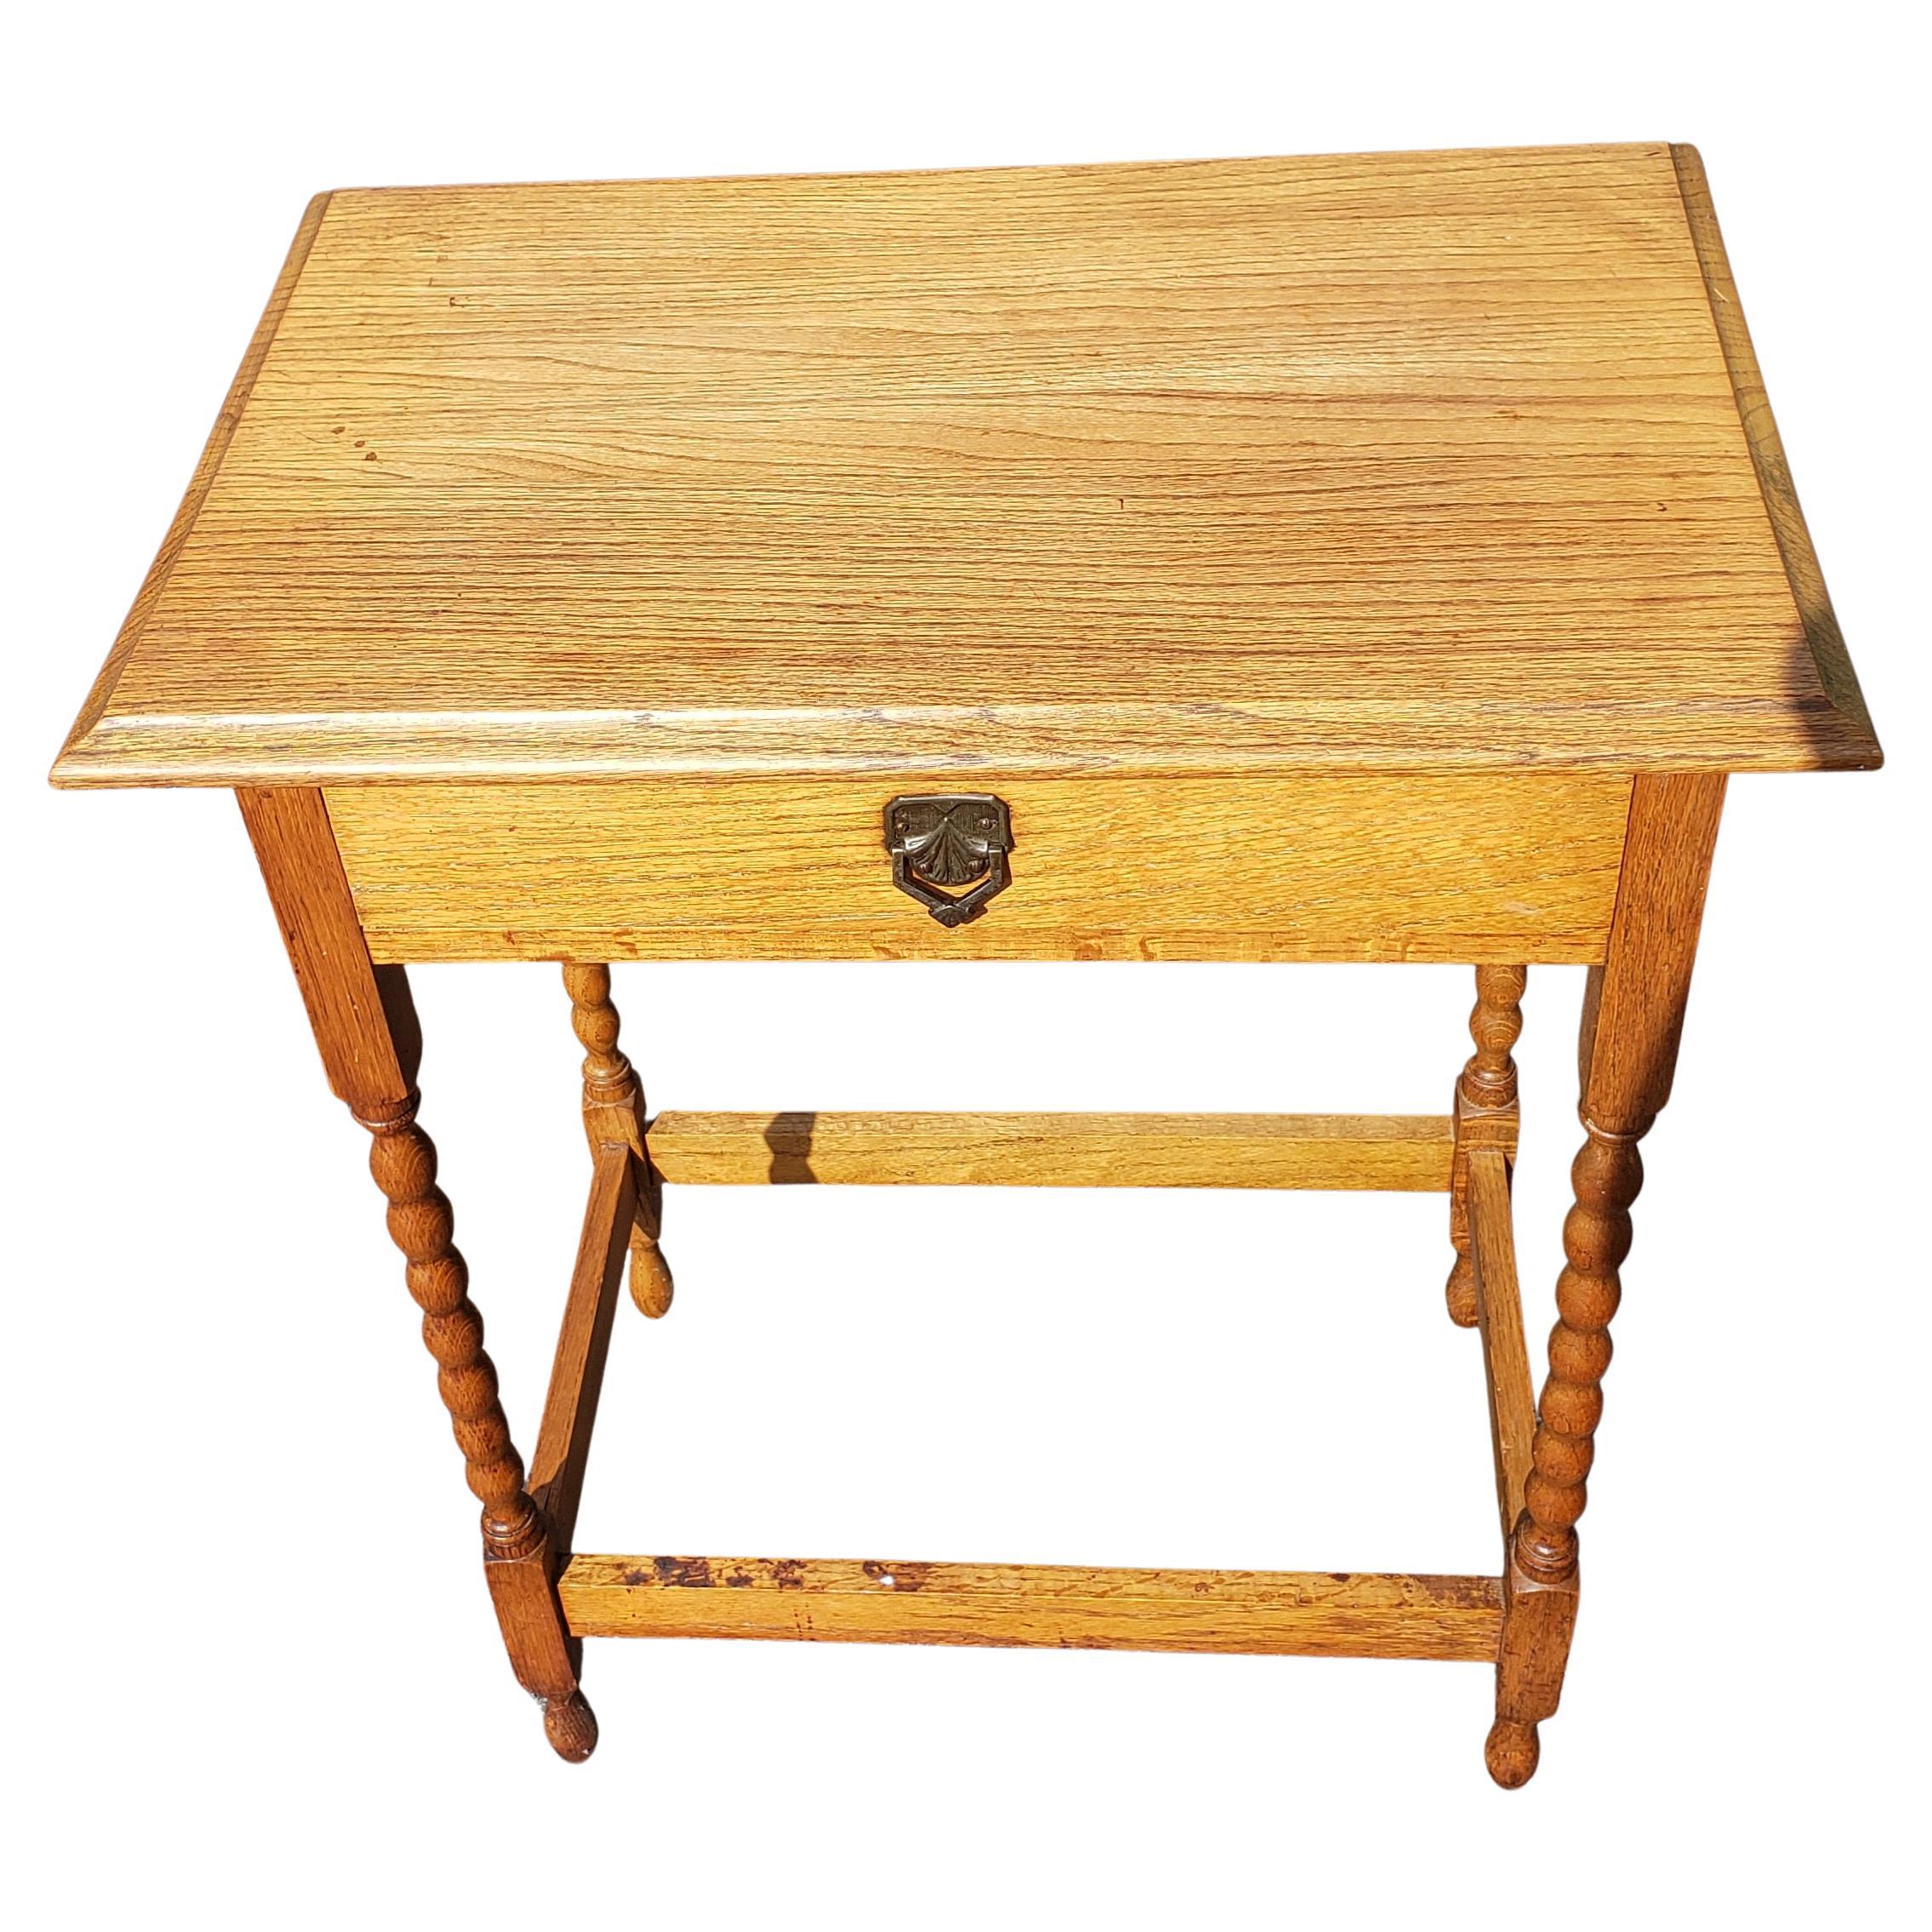 Vintage English One Drawer Oak Industrial Table, Side Table In Good Condition For Sale In Germantown, MD